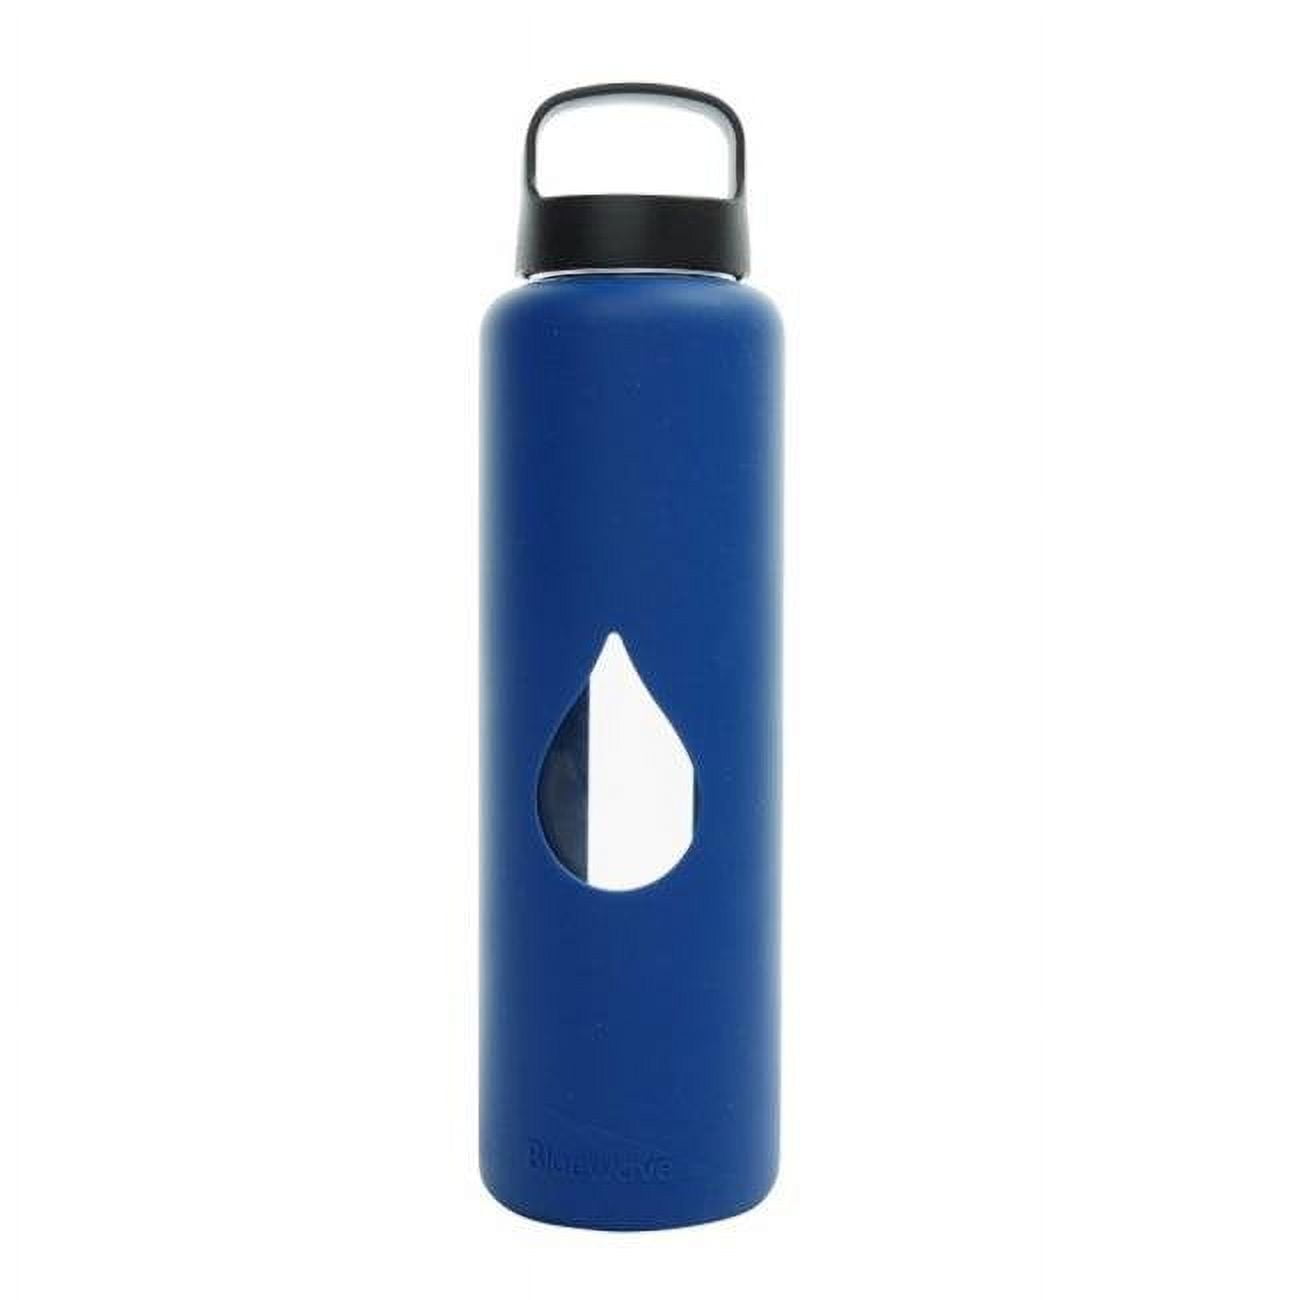 Gg150lc-blue Reusable Glass Water Bottle With Loop Cap & Free Silicone Sleeve - Sky Blue, 750 Ml.